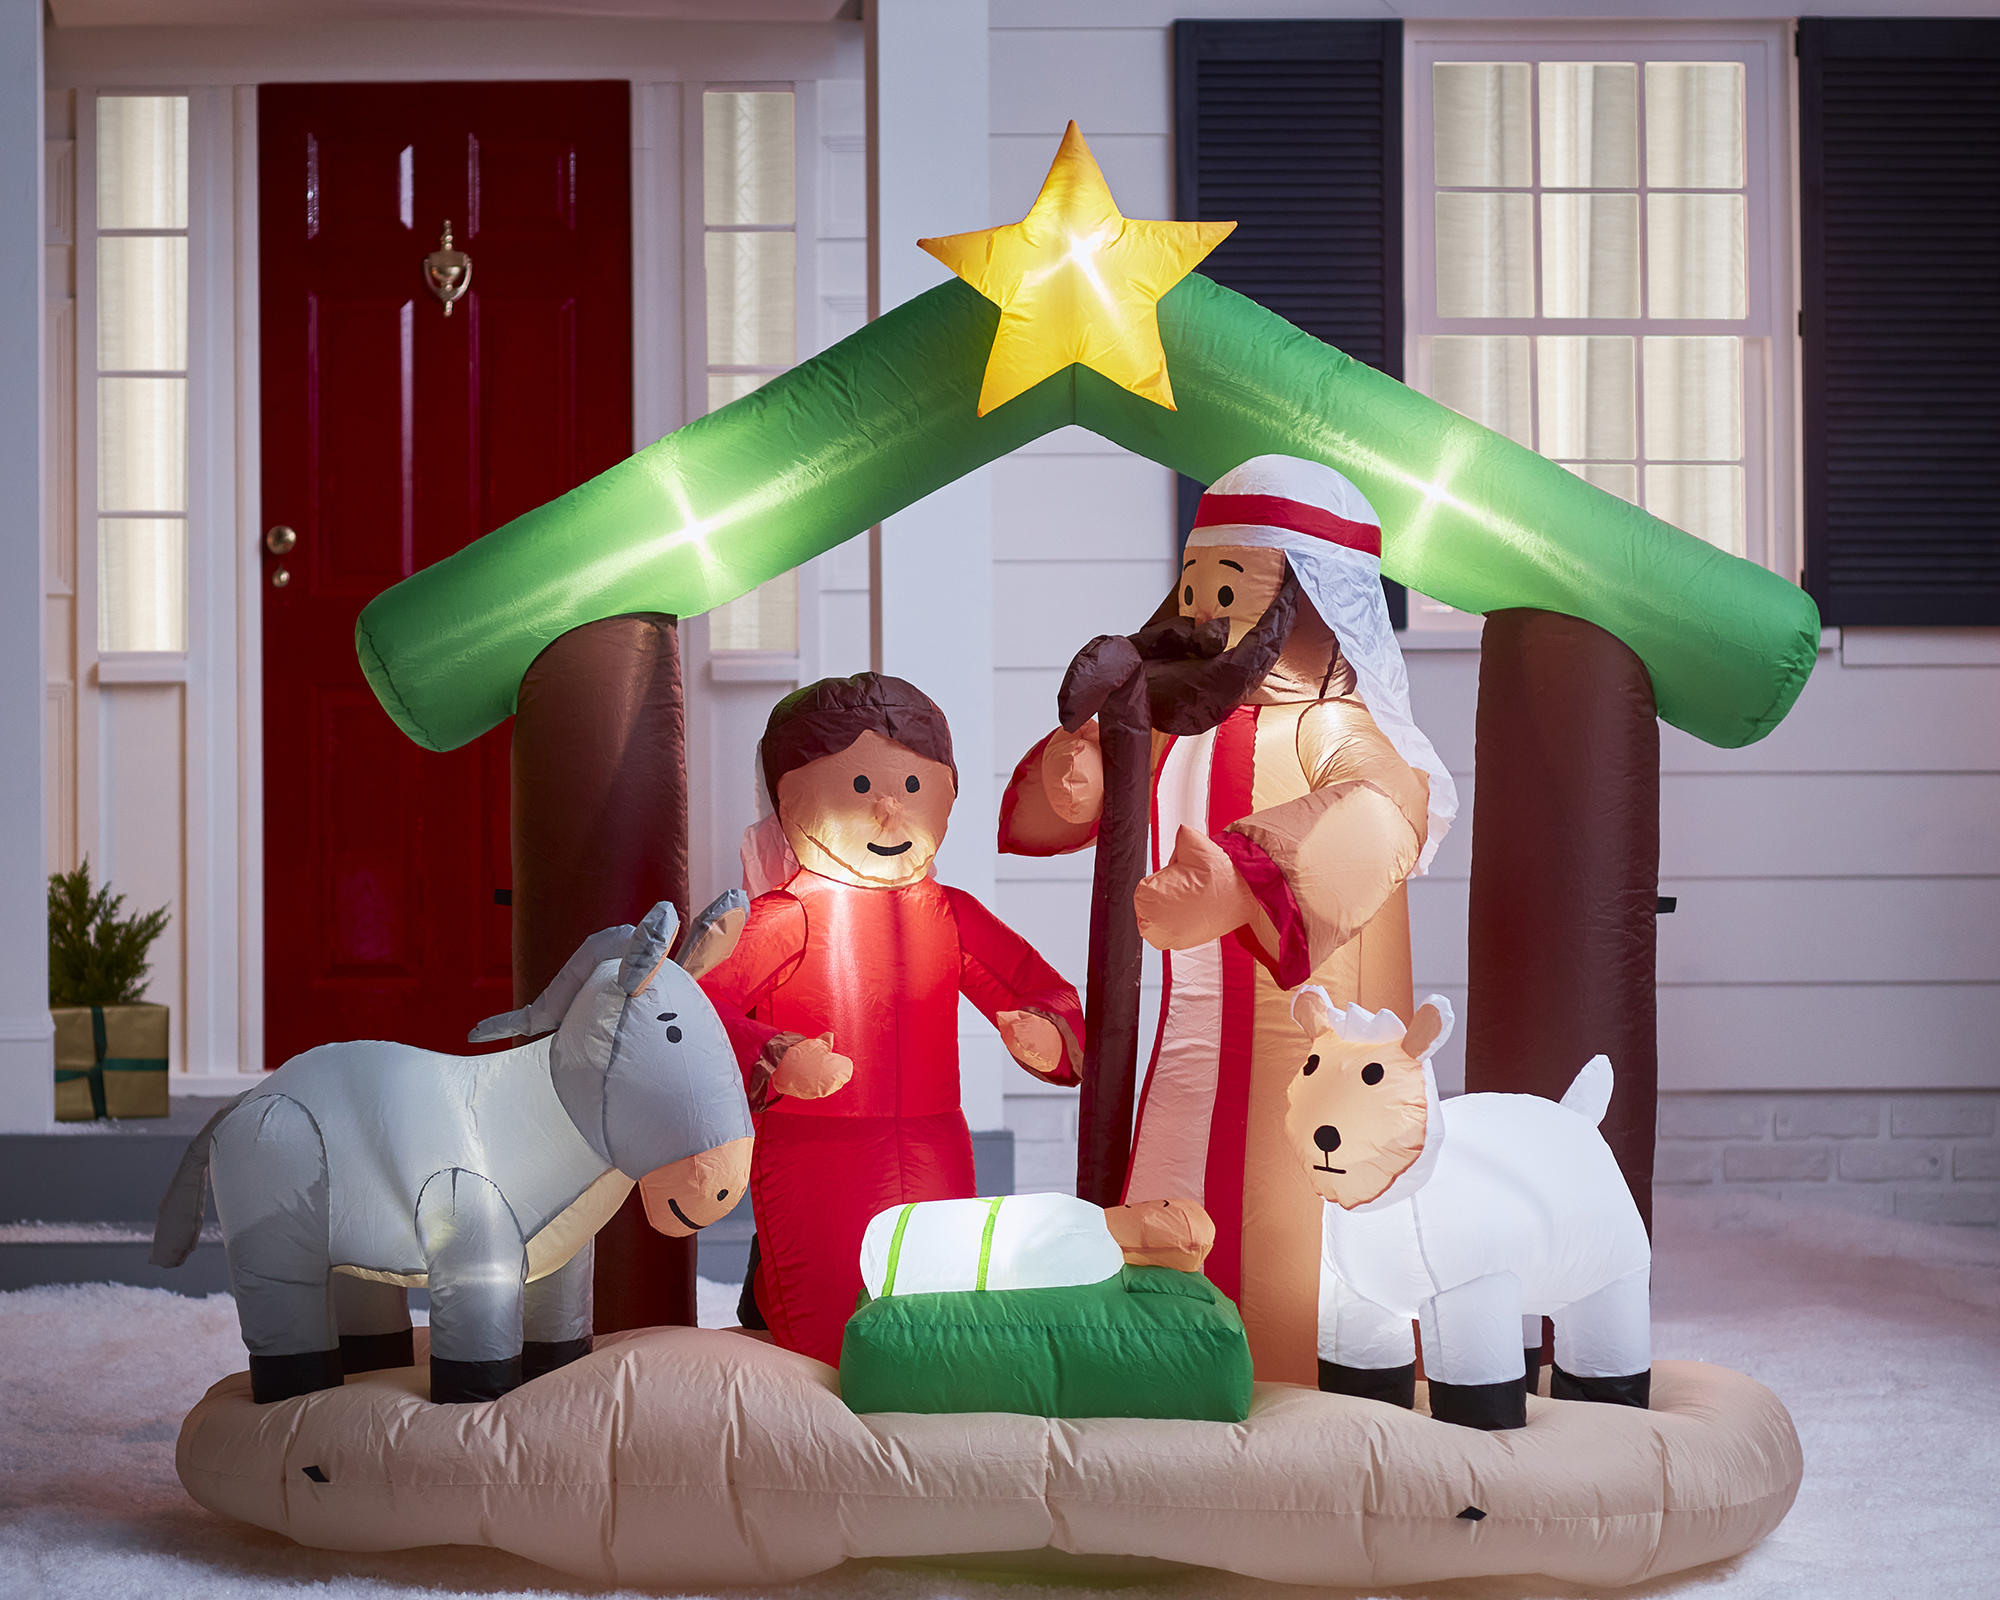 Nativity Scene Inflatable outside house with red front door and blue window shutters